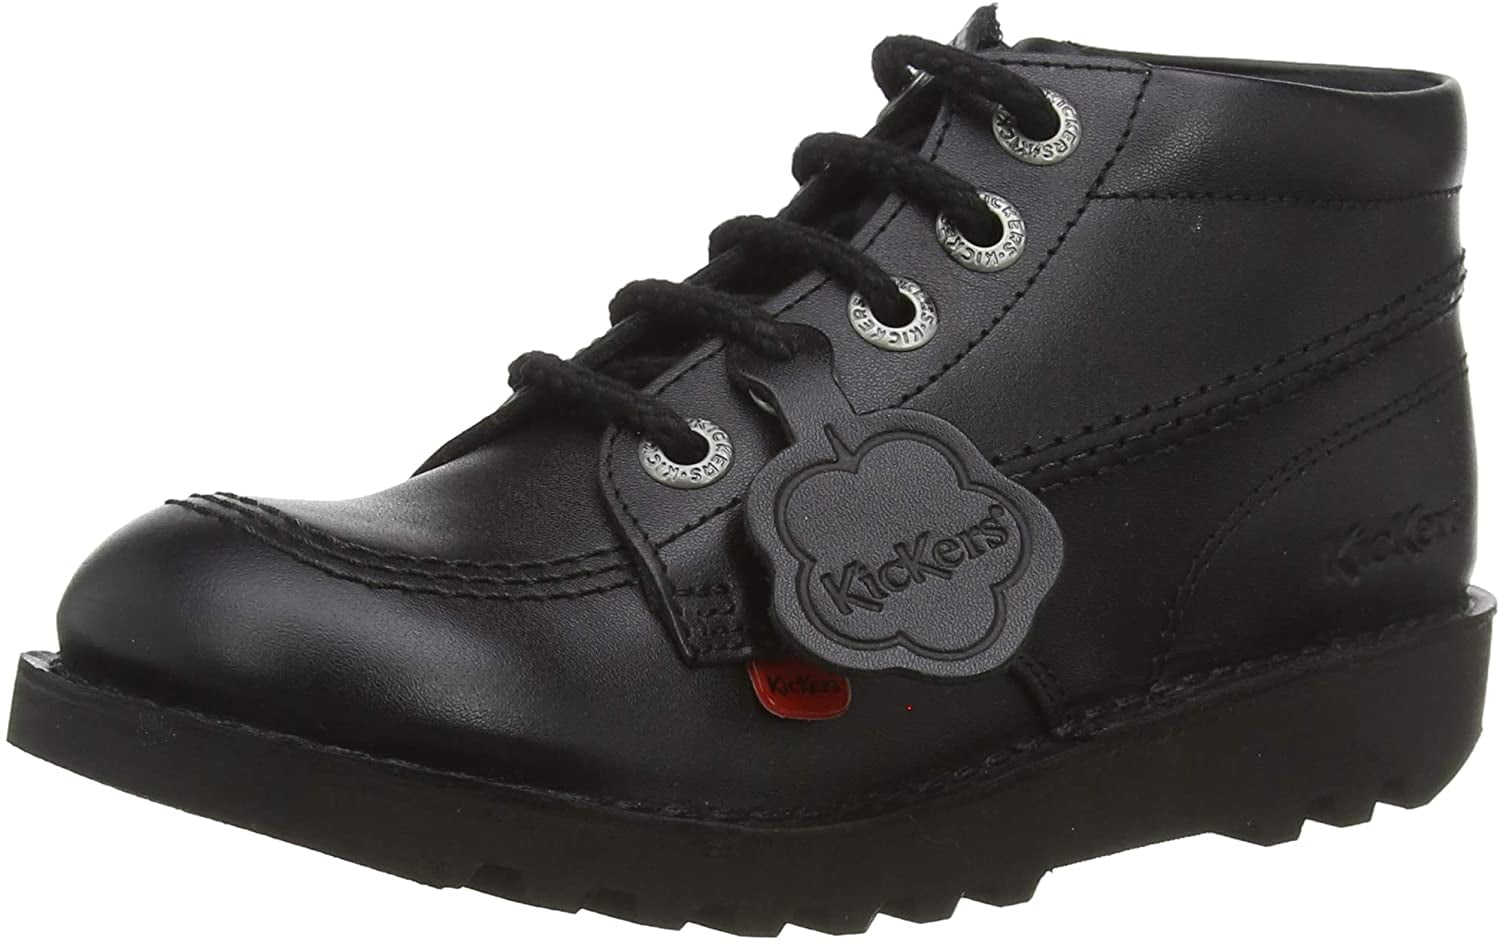 Details about   Kickers Kick Styly Kids Leather Boots  School Chidren Sizes 